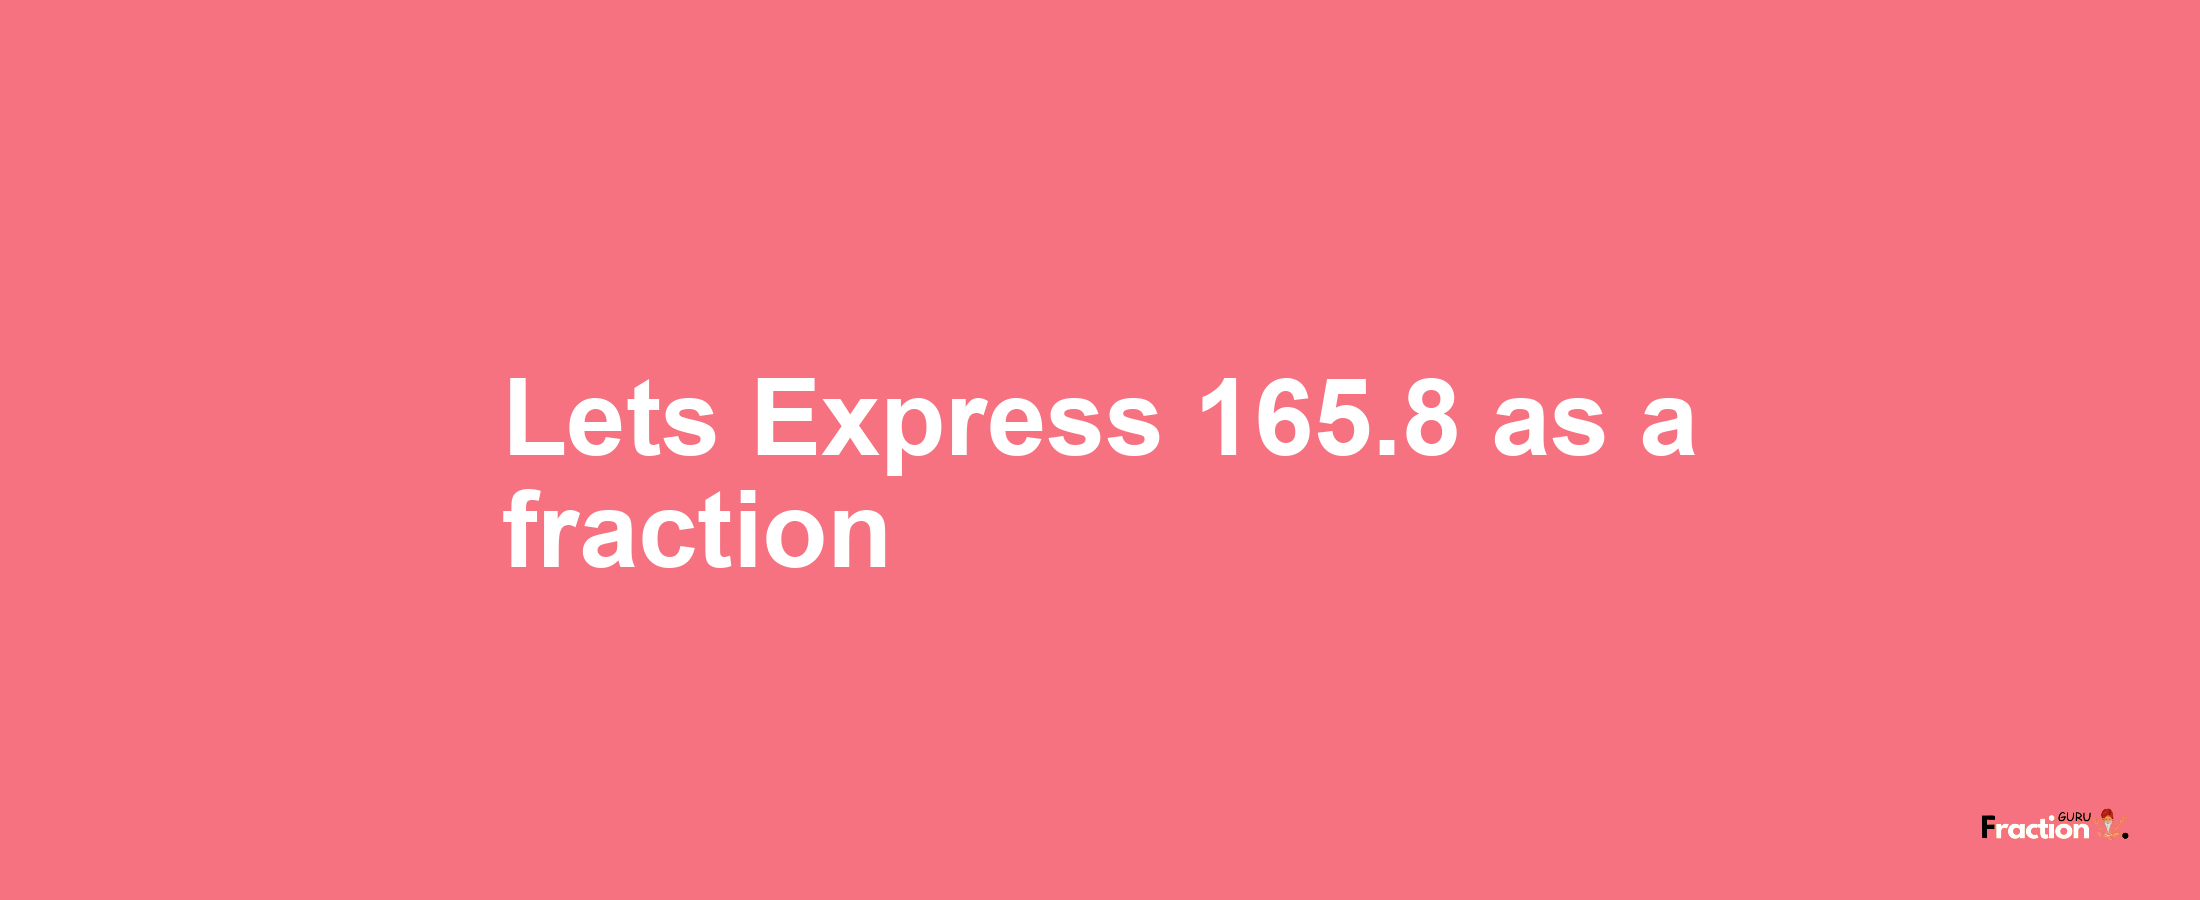 Lets Express 165.8 as afraction